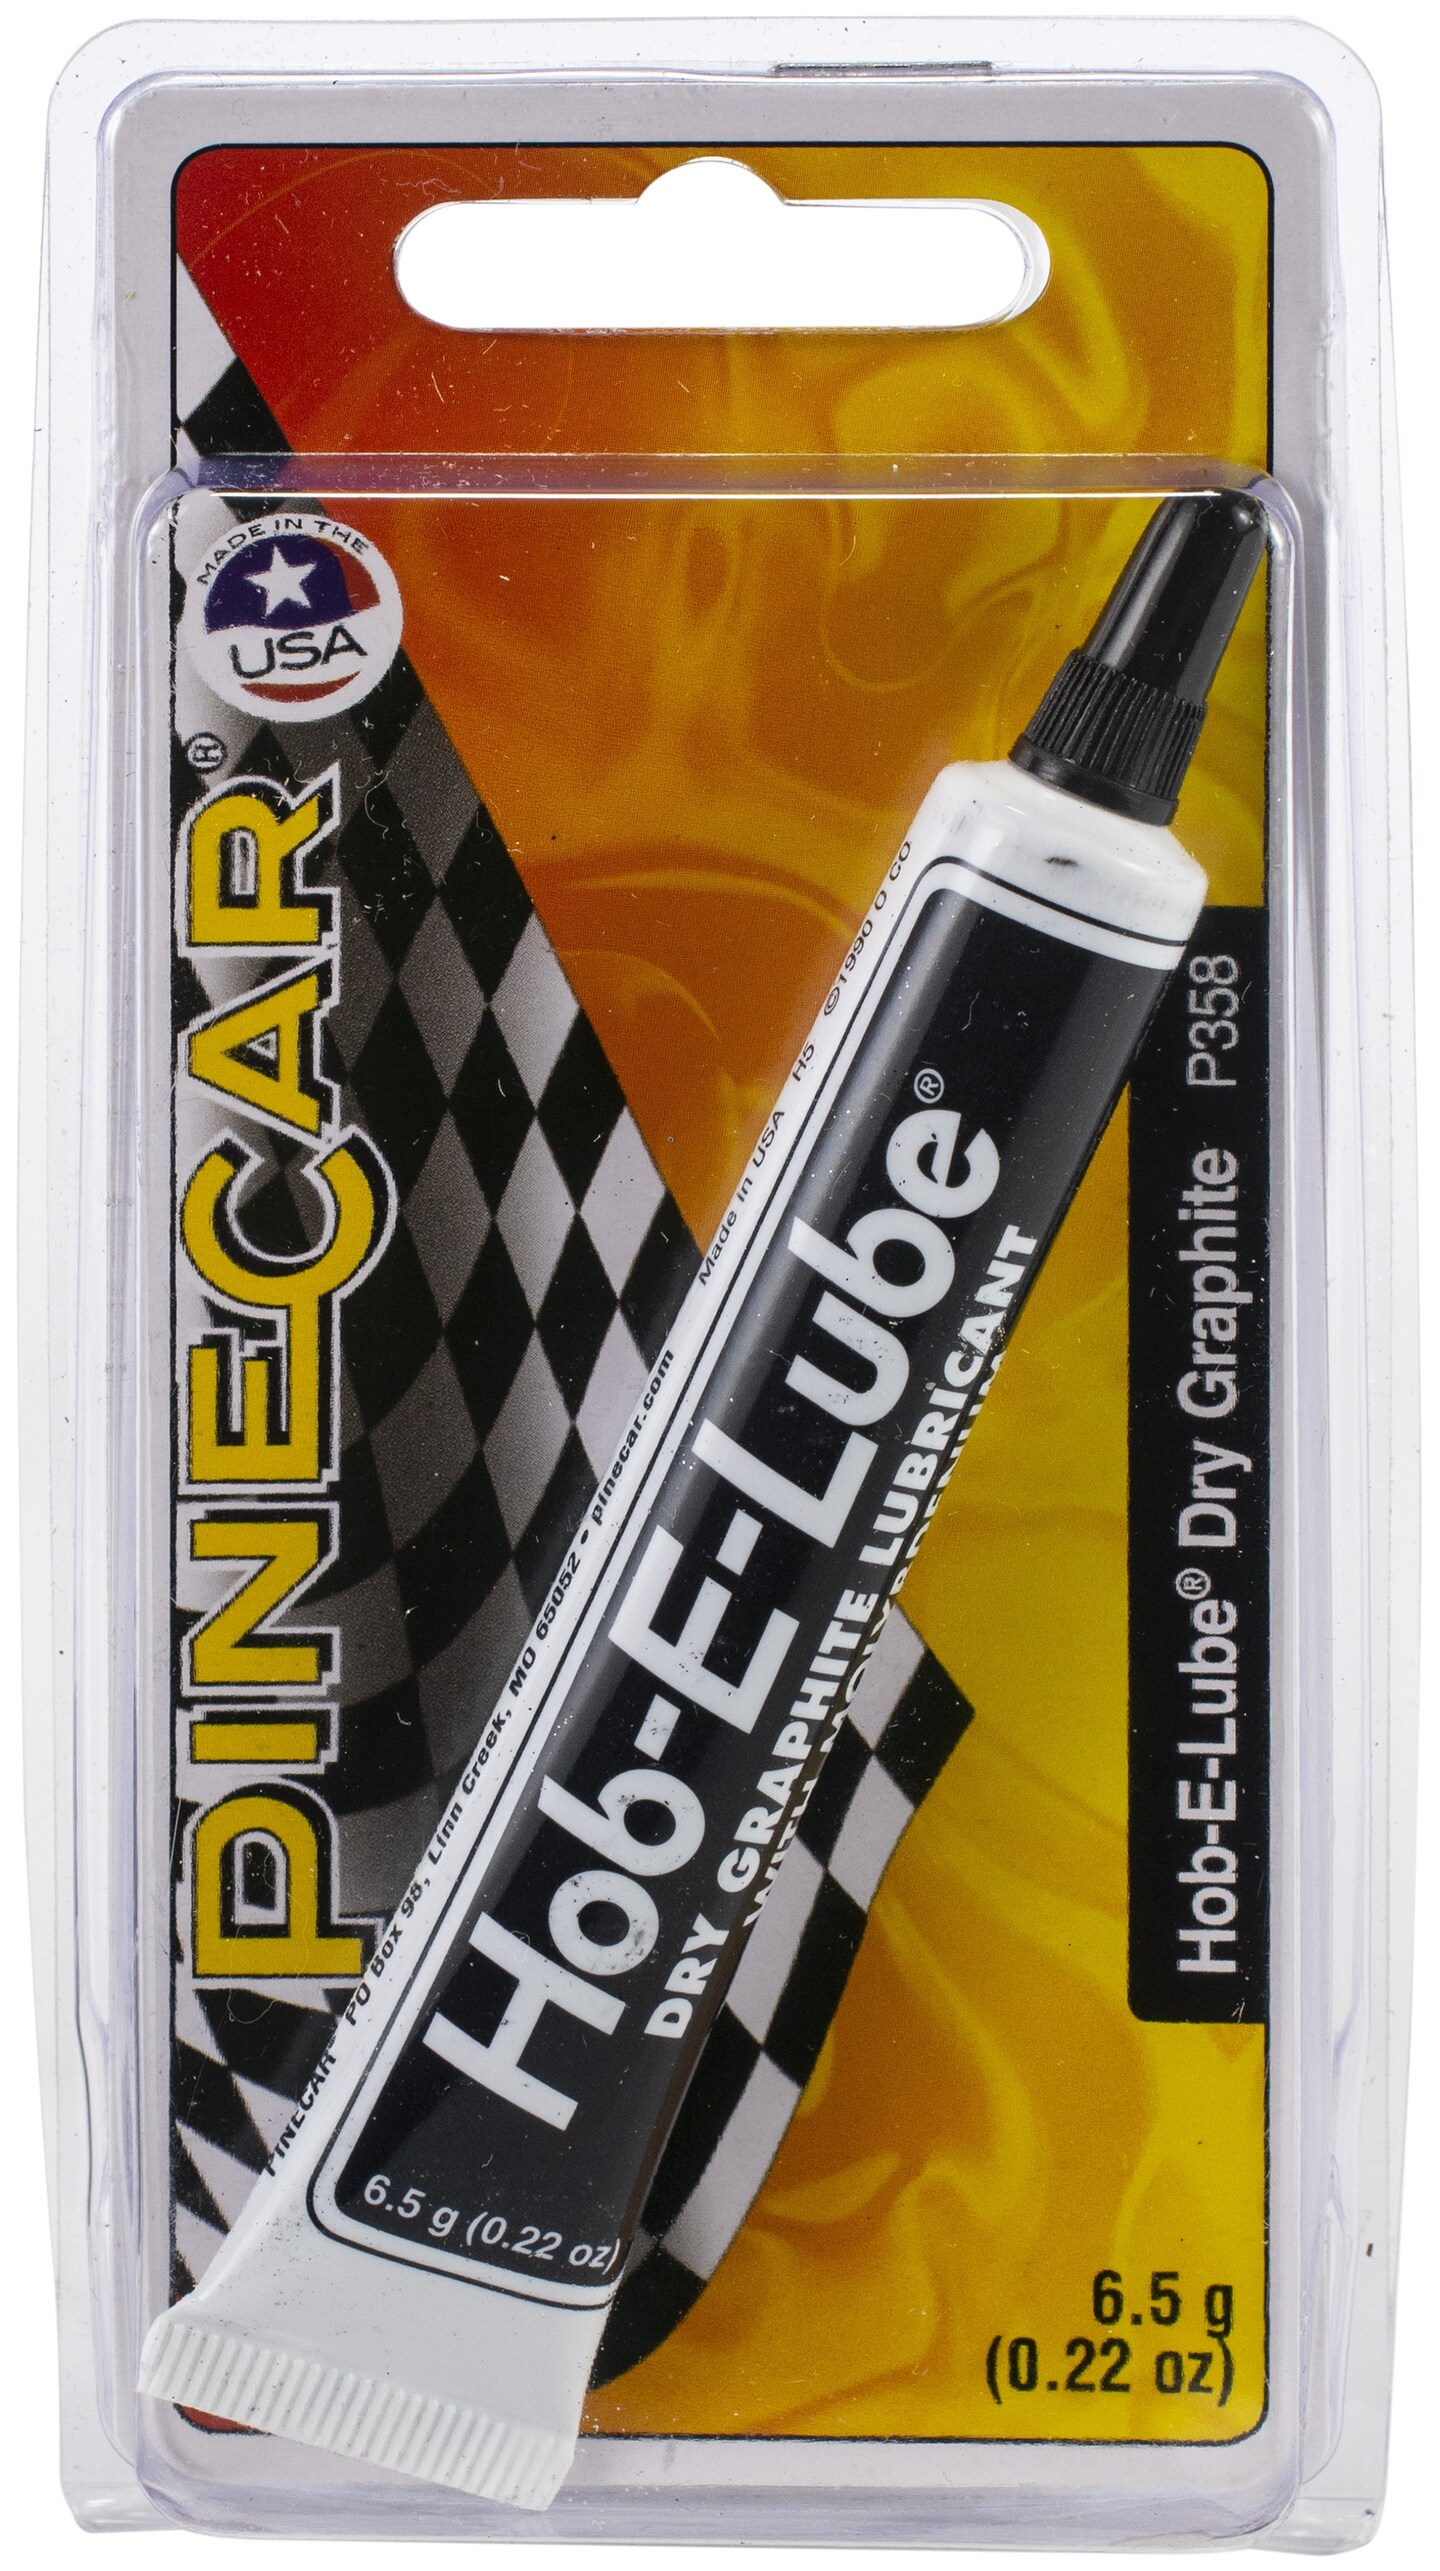 Pinewood Pro Pine Derby Complete Car Kit with PRO Graphite